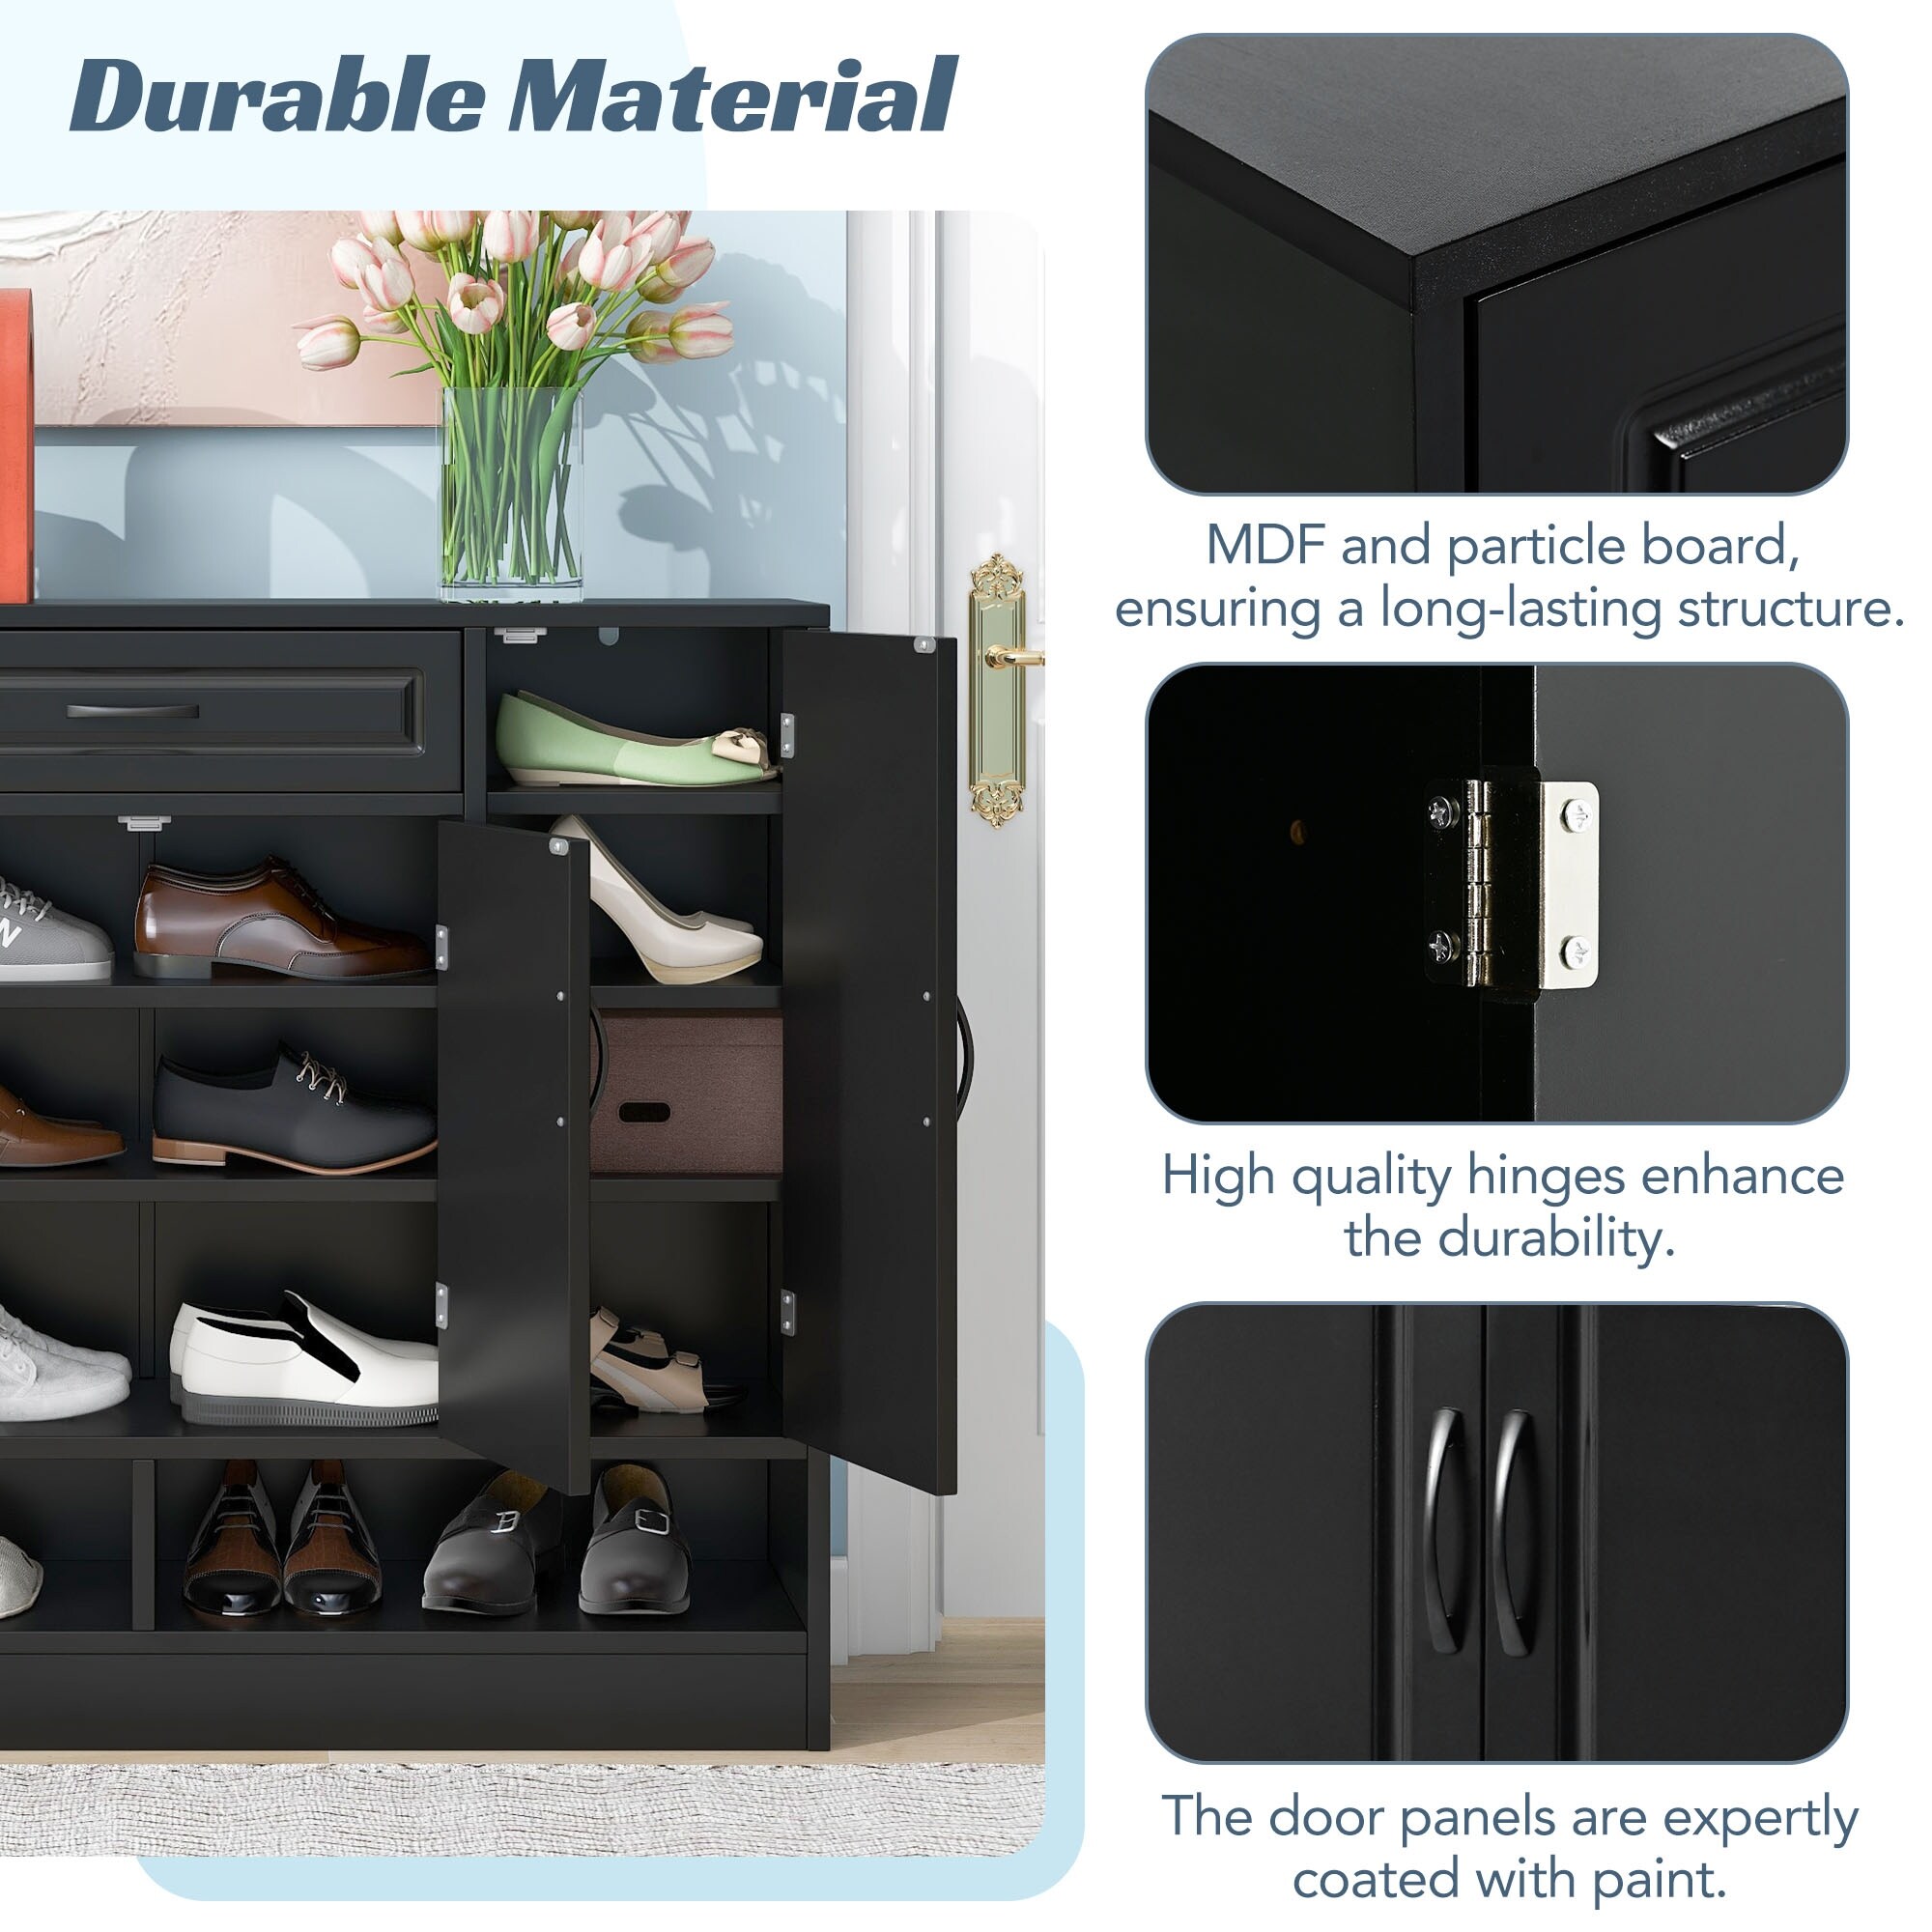 https://ak1.ostkcdn.com/images/products/is/images/direct/2496b2000067374f4be90002e715ce2ec3b10c6d/Sleek-Modern-Shoe-Storage-Cabinet-with-Adjustable-Shelves%2C-Shoe-Organizer-with-Drawer%2C-Multifunctional-Storage-Sideboard.jpg